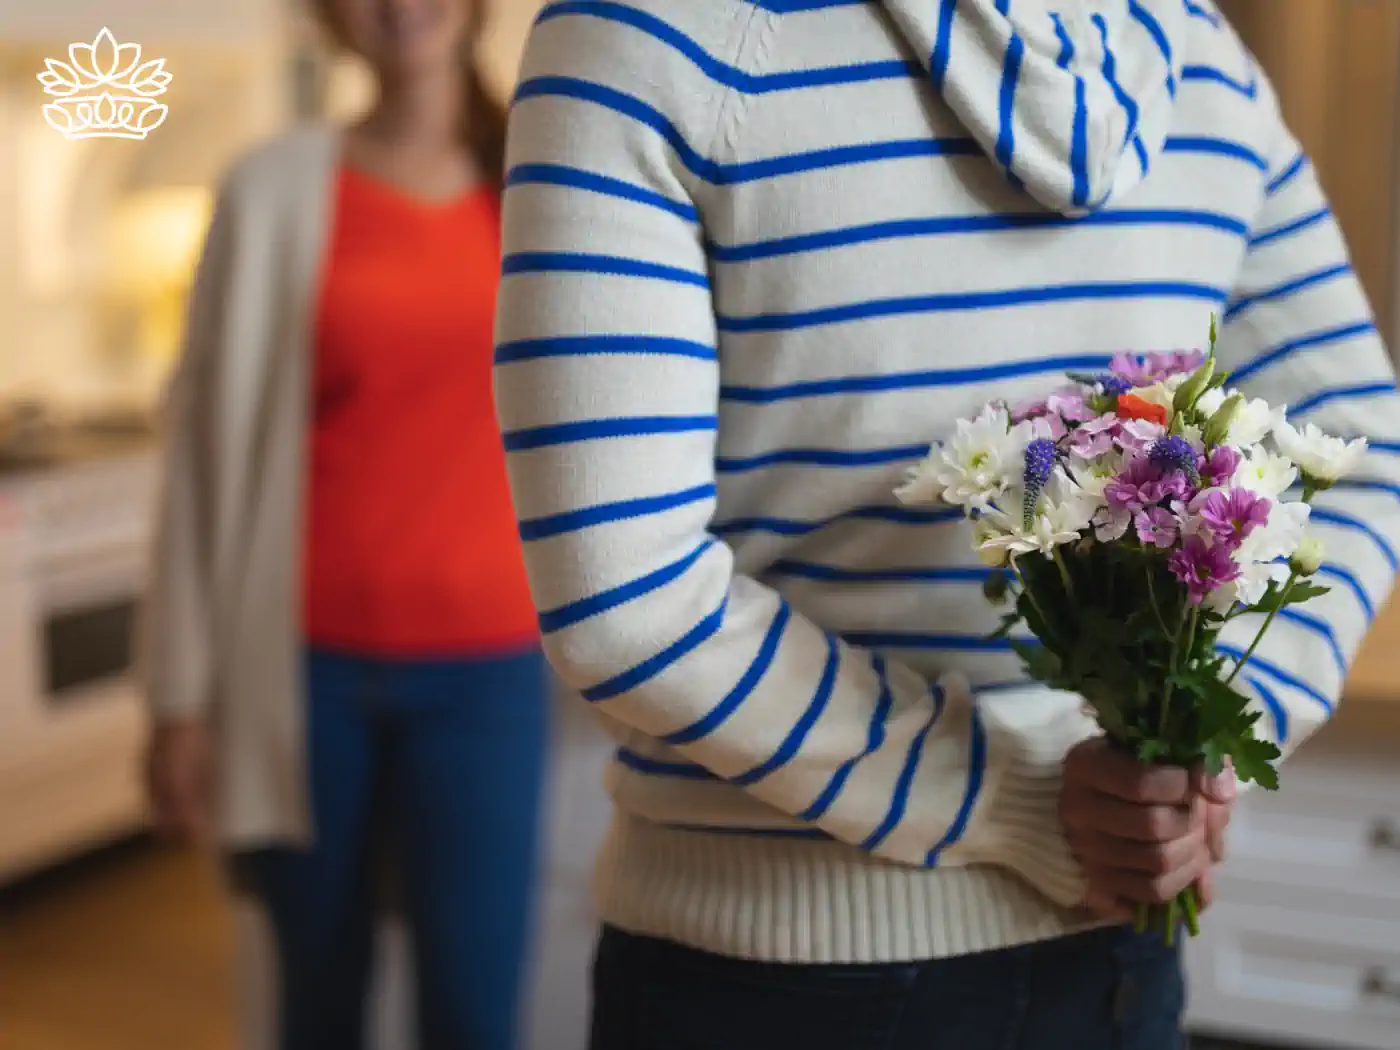 Man in a striped sweater holding a bouquet of fresh mixed flowers, including white, purple, and pink blooms, with a smiling woman in the background in a cozy home setting. 